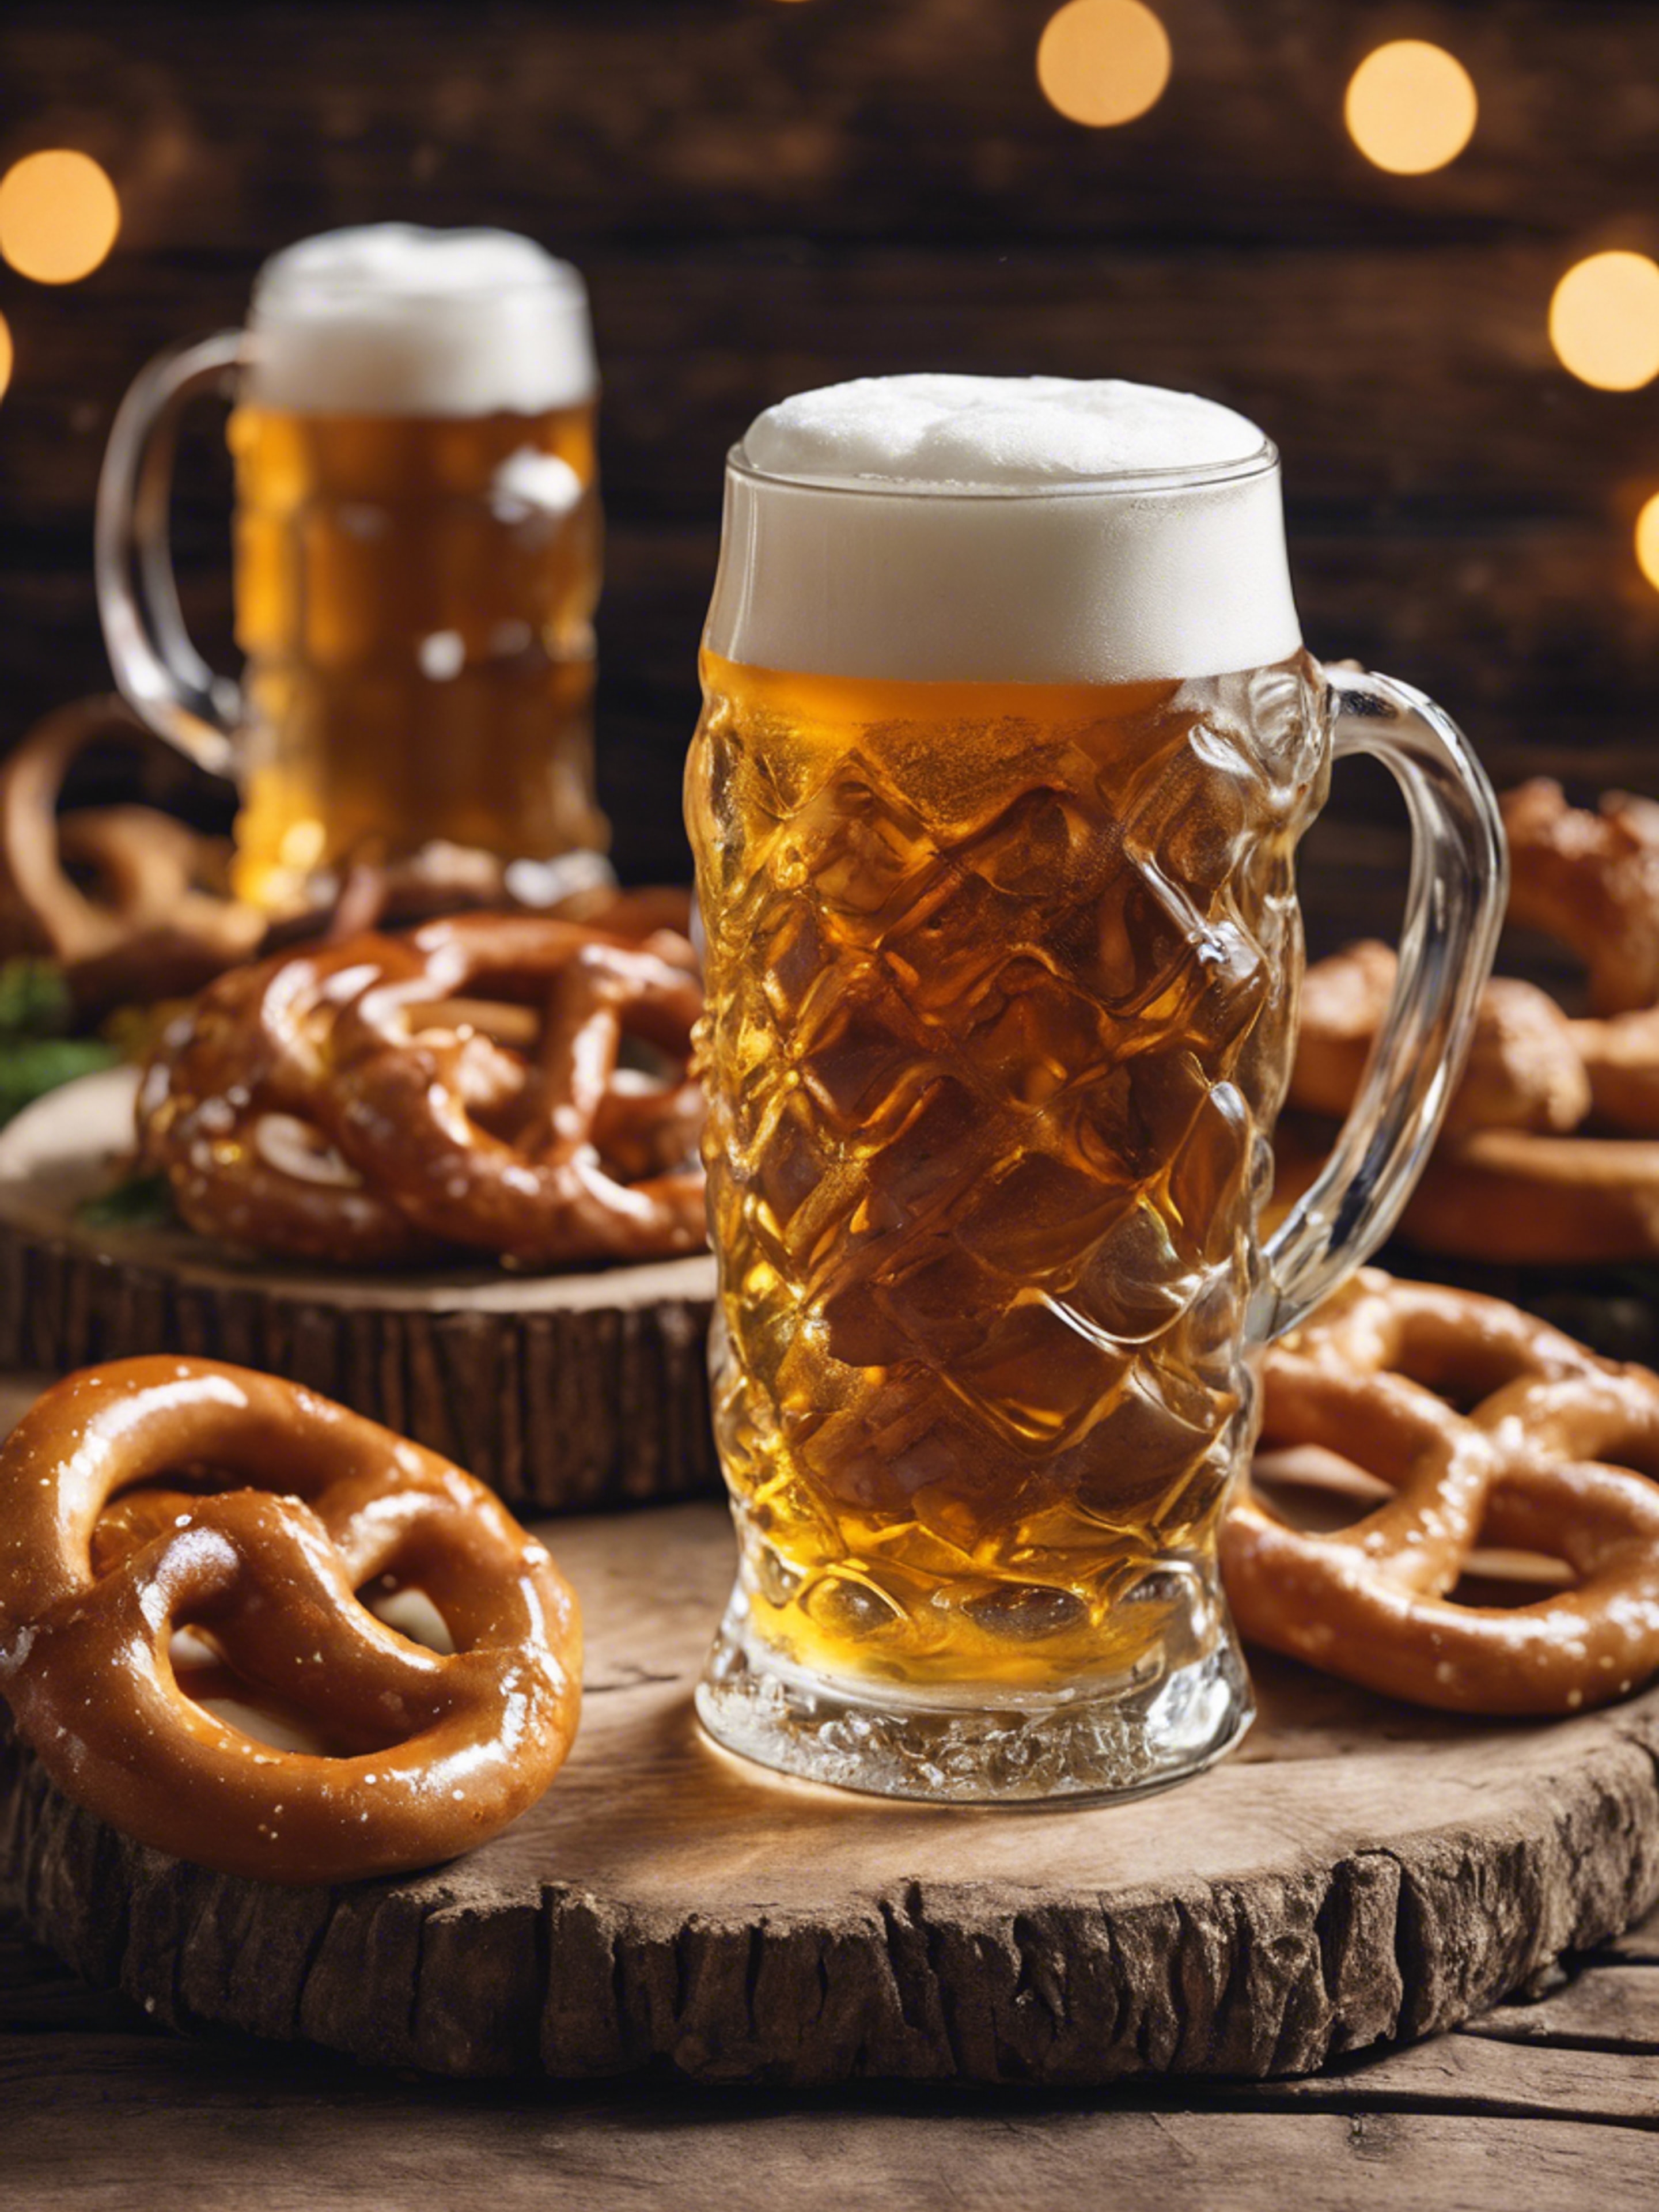 A foamy German beer, pretzels, and other Oktoberfest traditional foods on a rustic wooden table. Tapet[8867ca72213c4237bd6d]